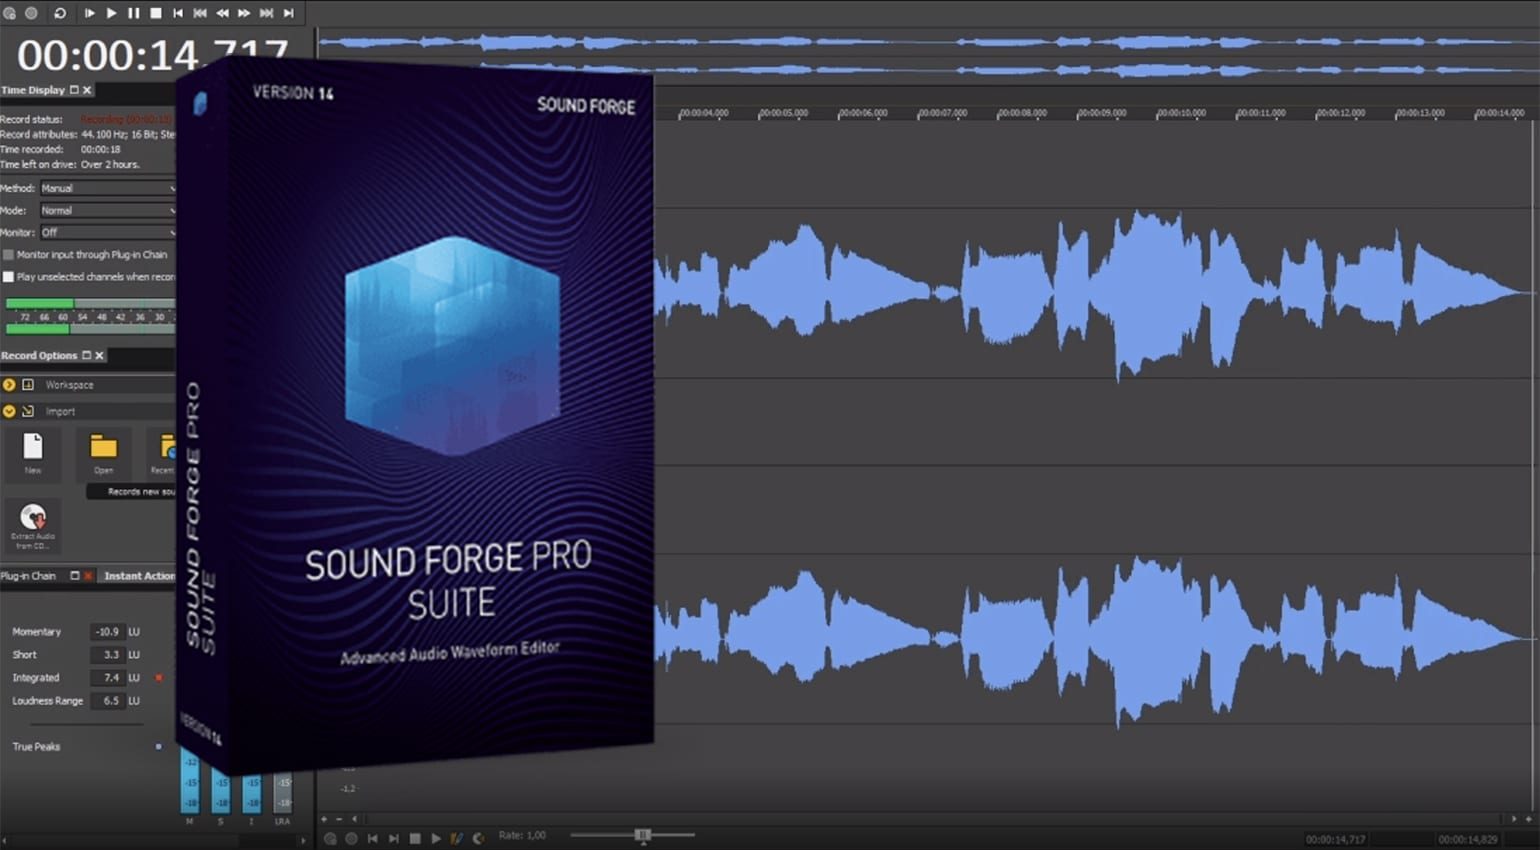 MAGIX Sound Forge Audio Studio Pro 17.0.2.109 download the new for mac